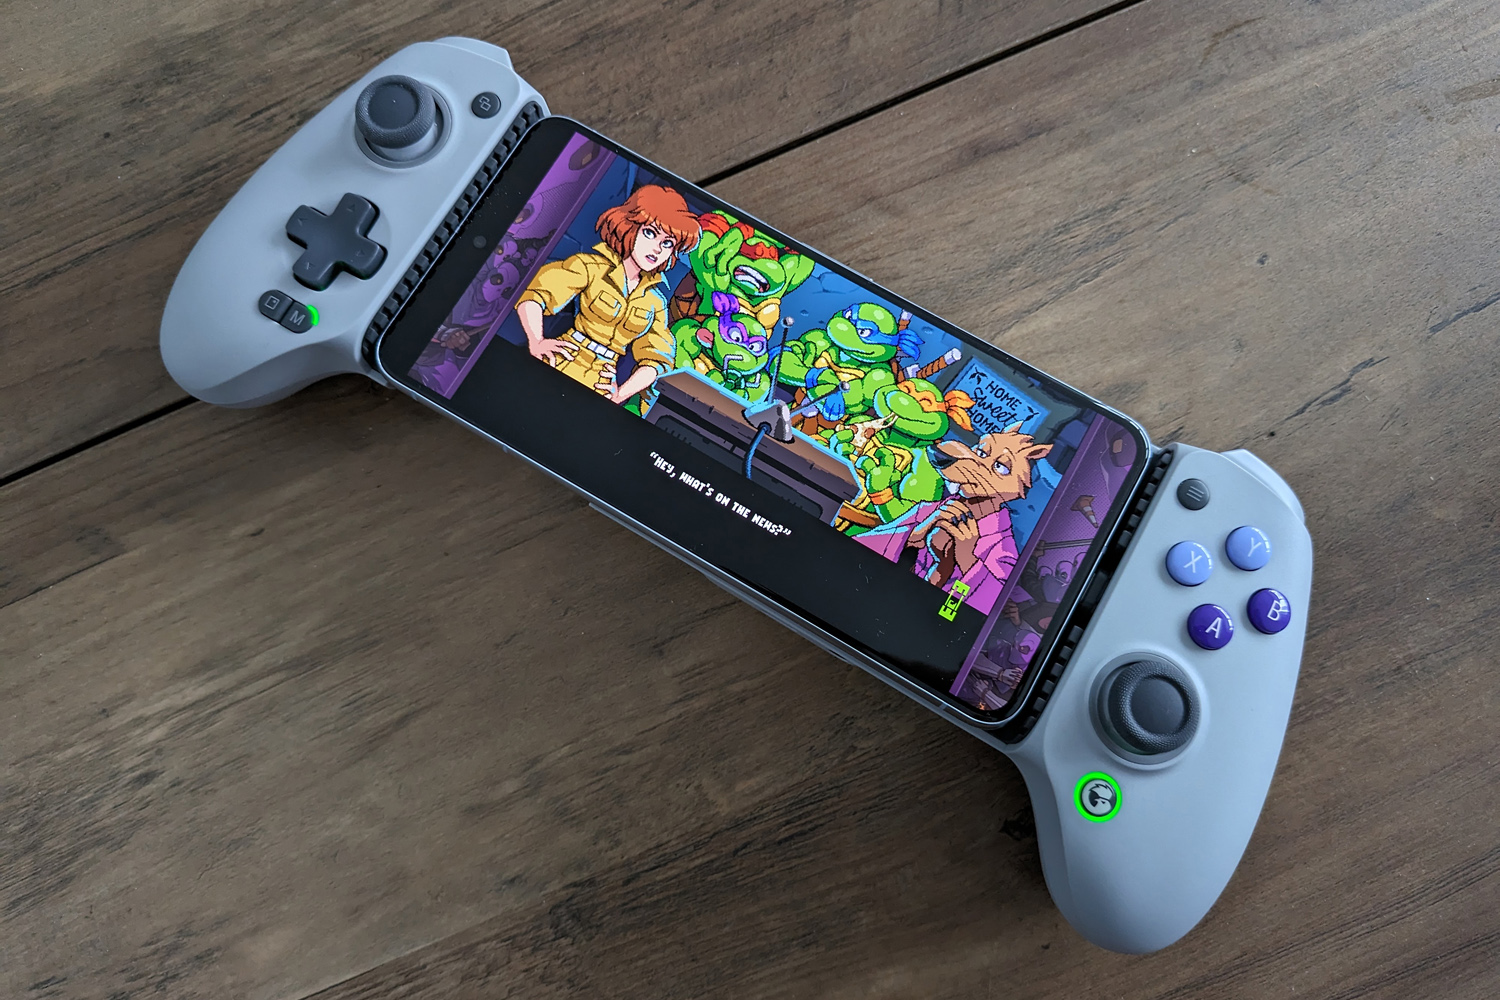 GameSir G8 Galileo brings console-size controls to your phone